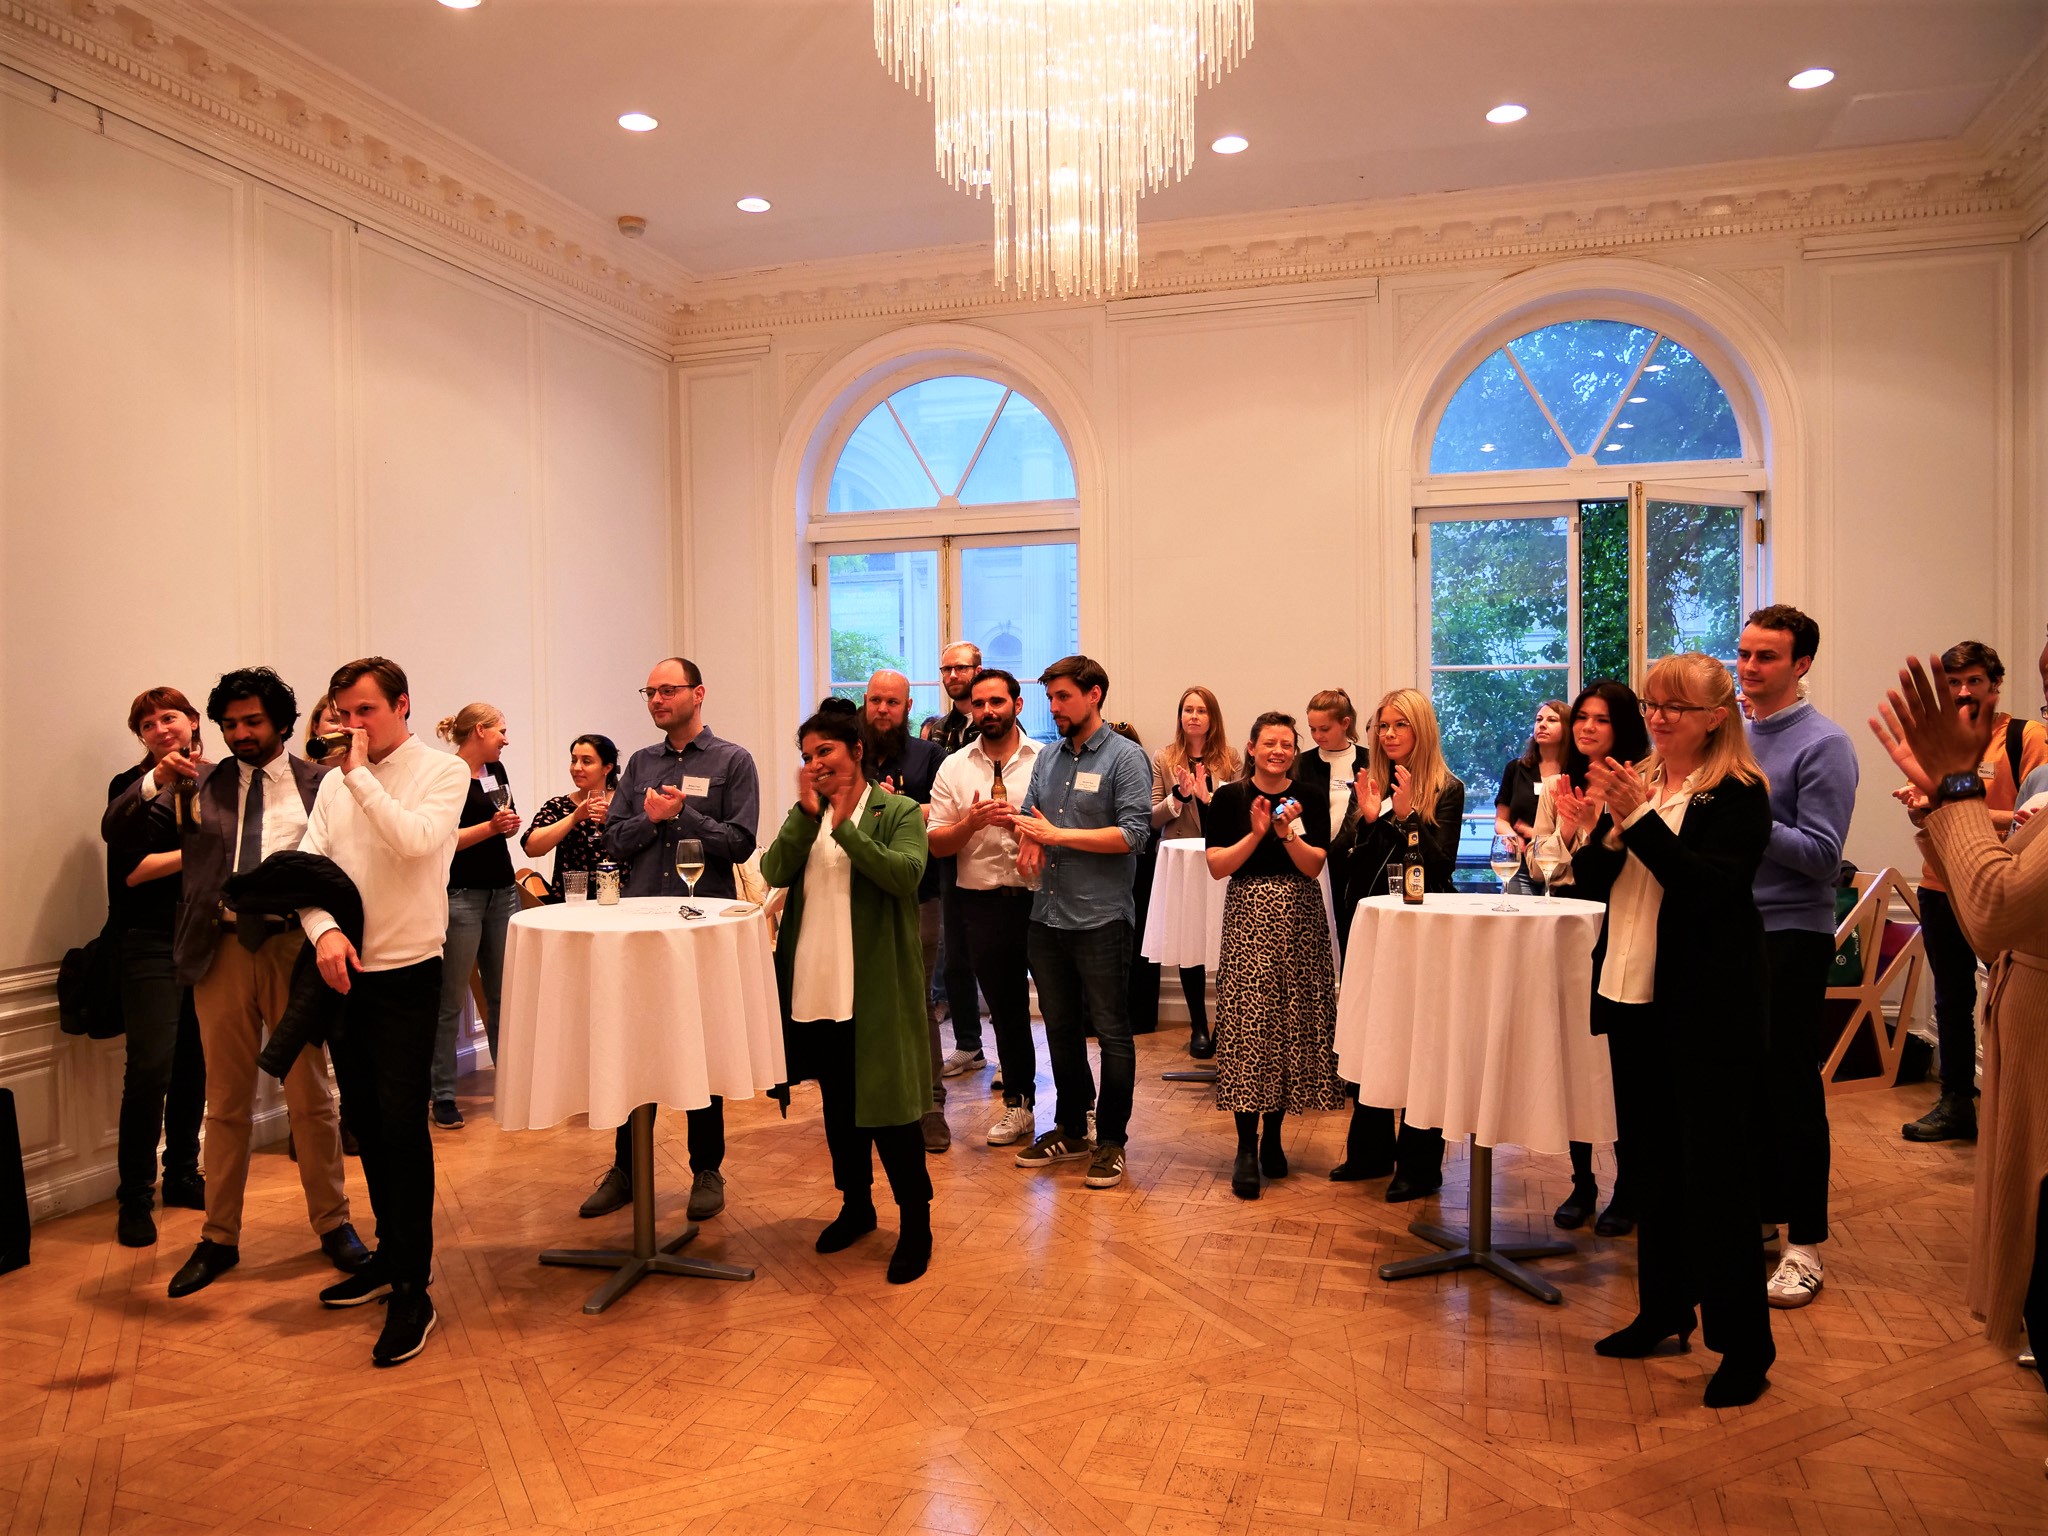 Impressions from the networking reception in New York: An enthusiastic audience